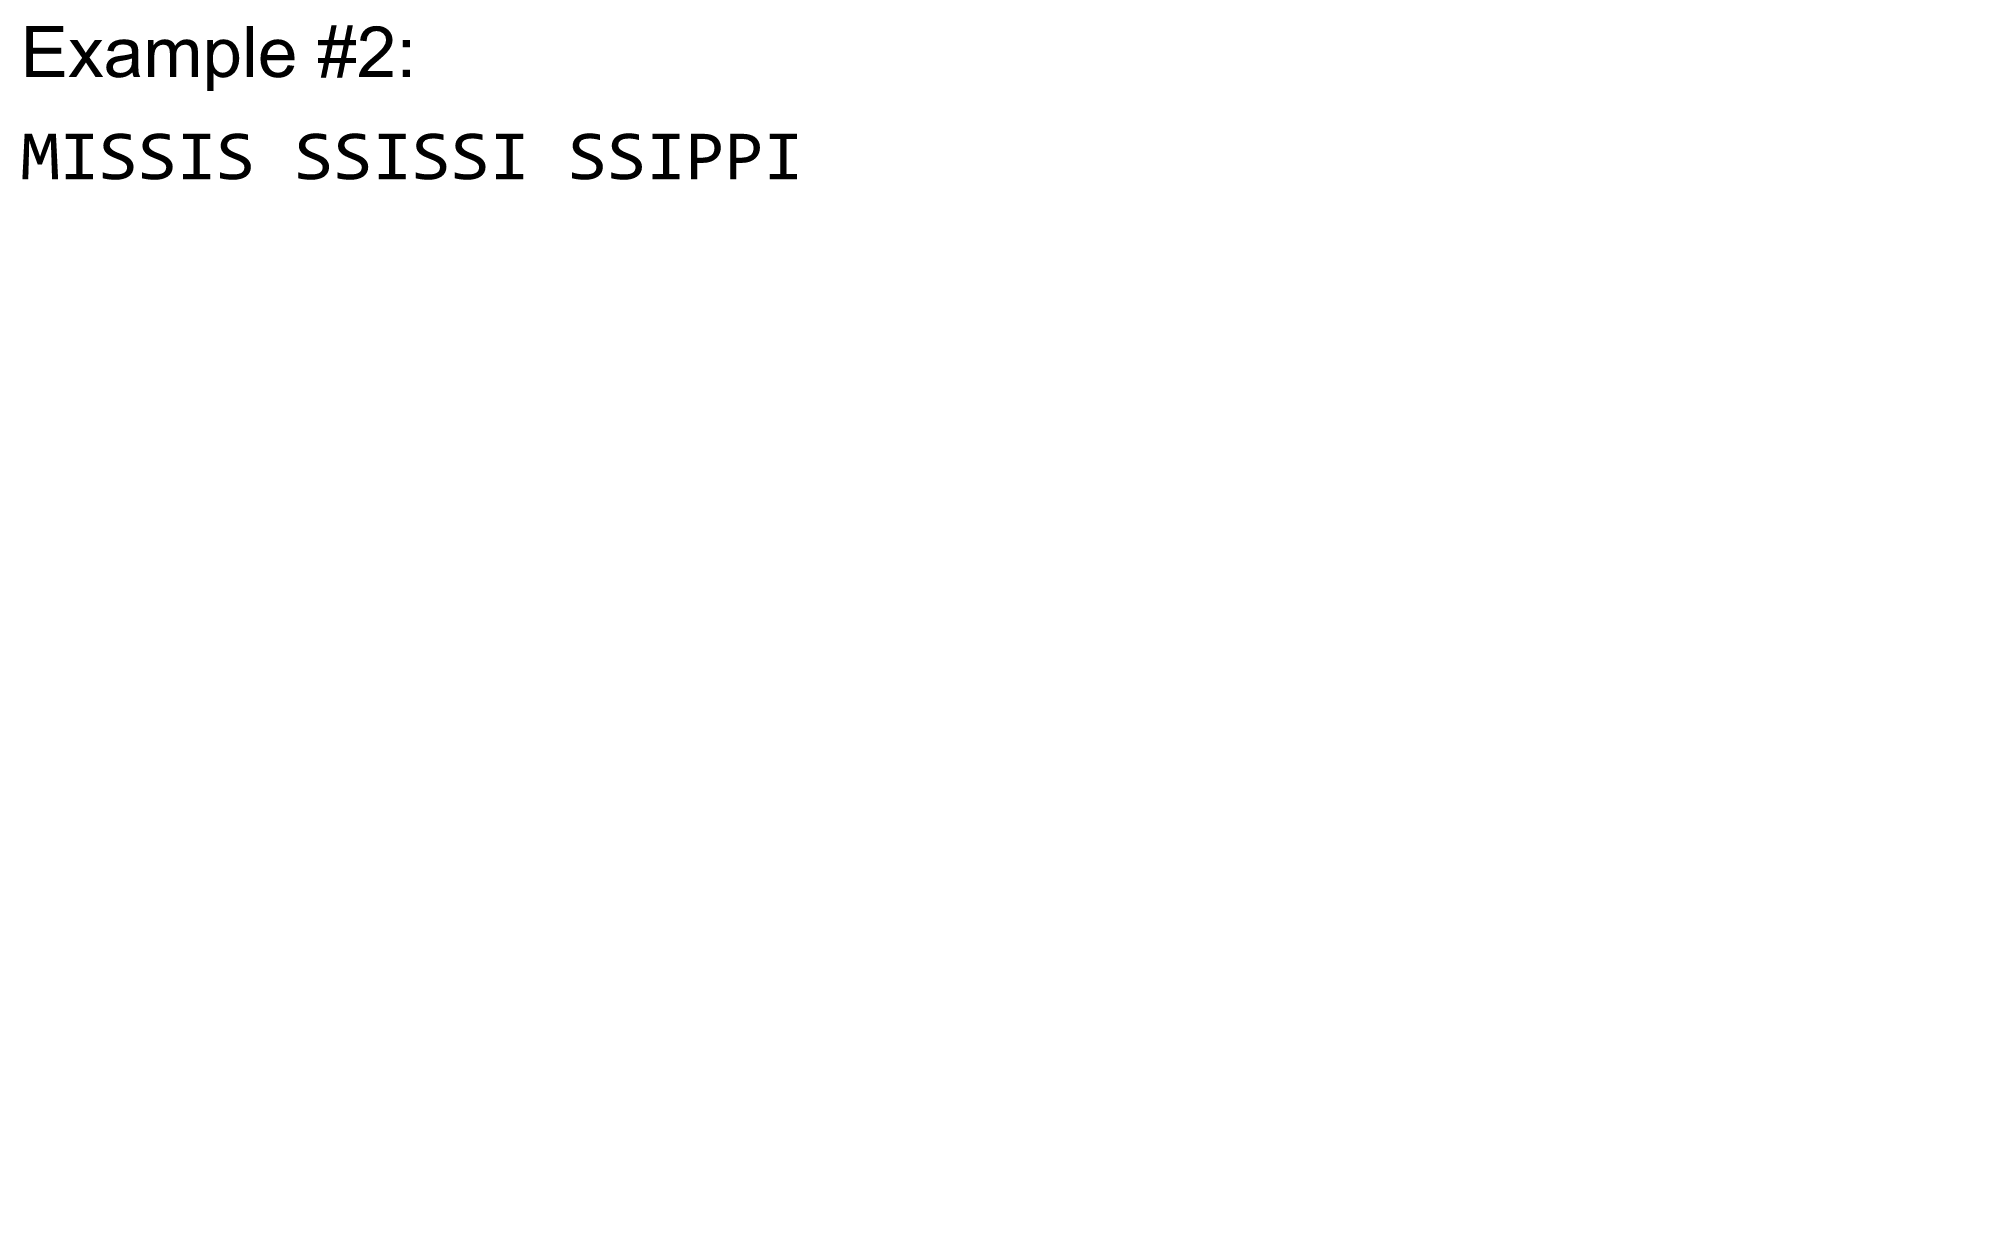 A second example with the word mississippi is shown. The fragments are now missis, ssissi, ssippi.